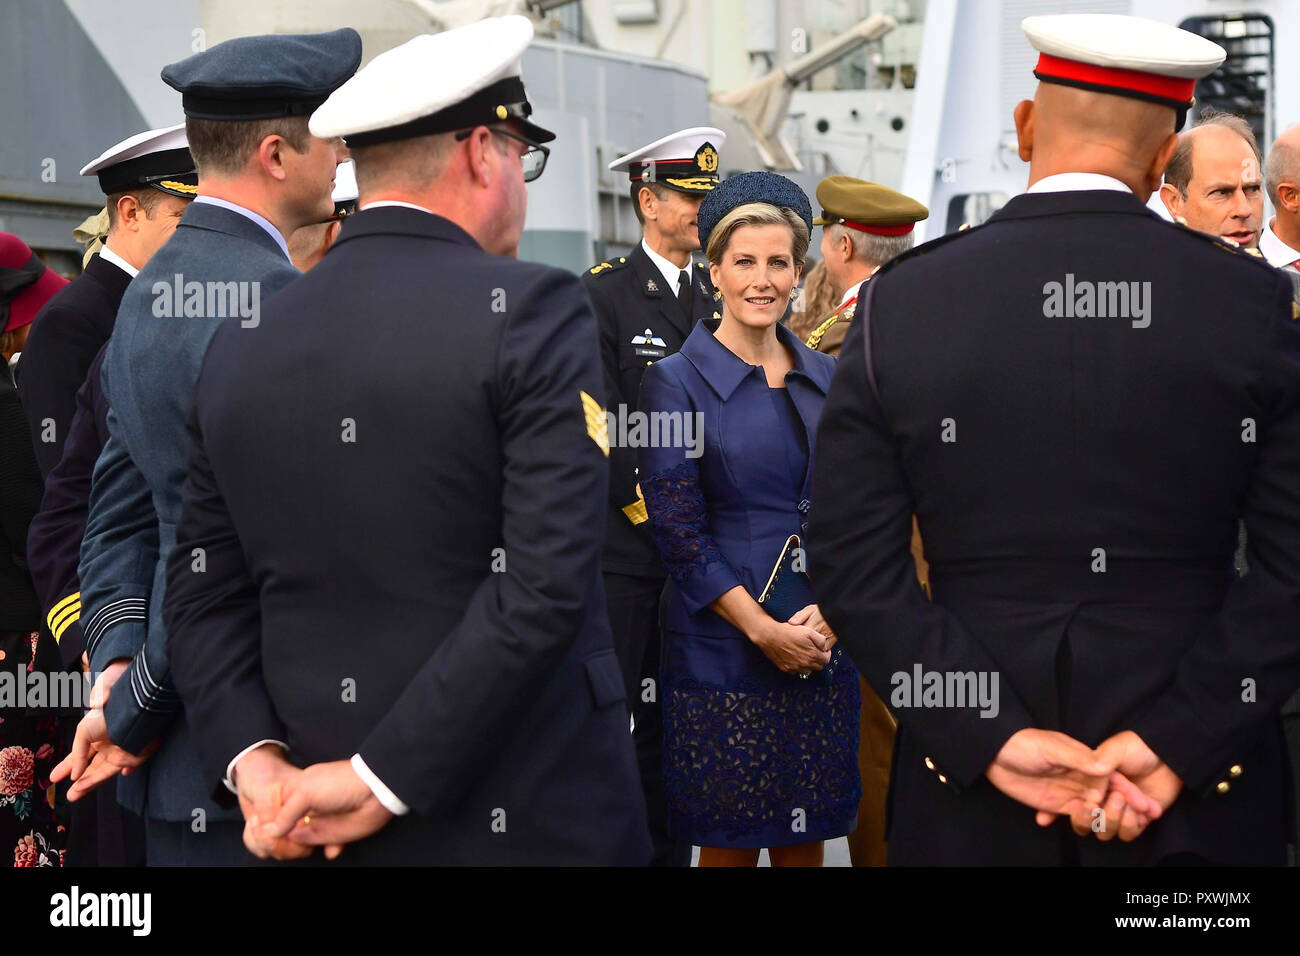 The Countess of Wessex (centre) during a visit by King Willem-Alexander and Queen Maxima of the Netherlands to HMS Belfast for an on-the-water capability demonstration between the Royal Netherlands Marine Corps and the Royal Marines. Stock Photo